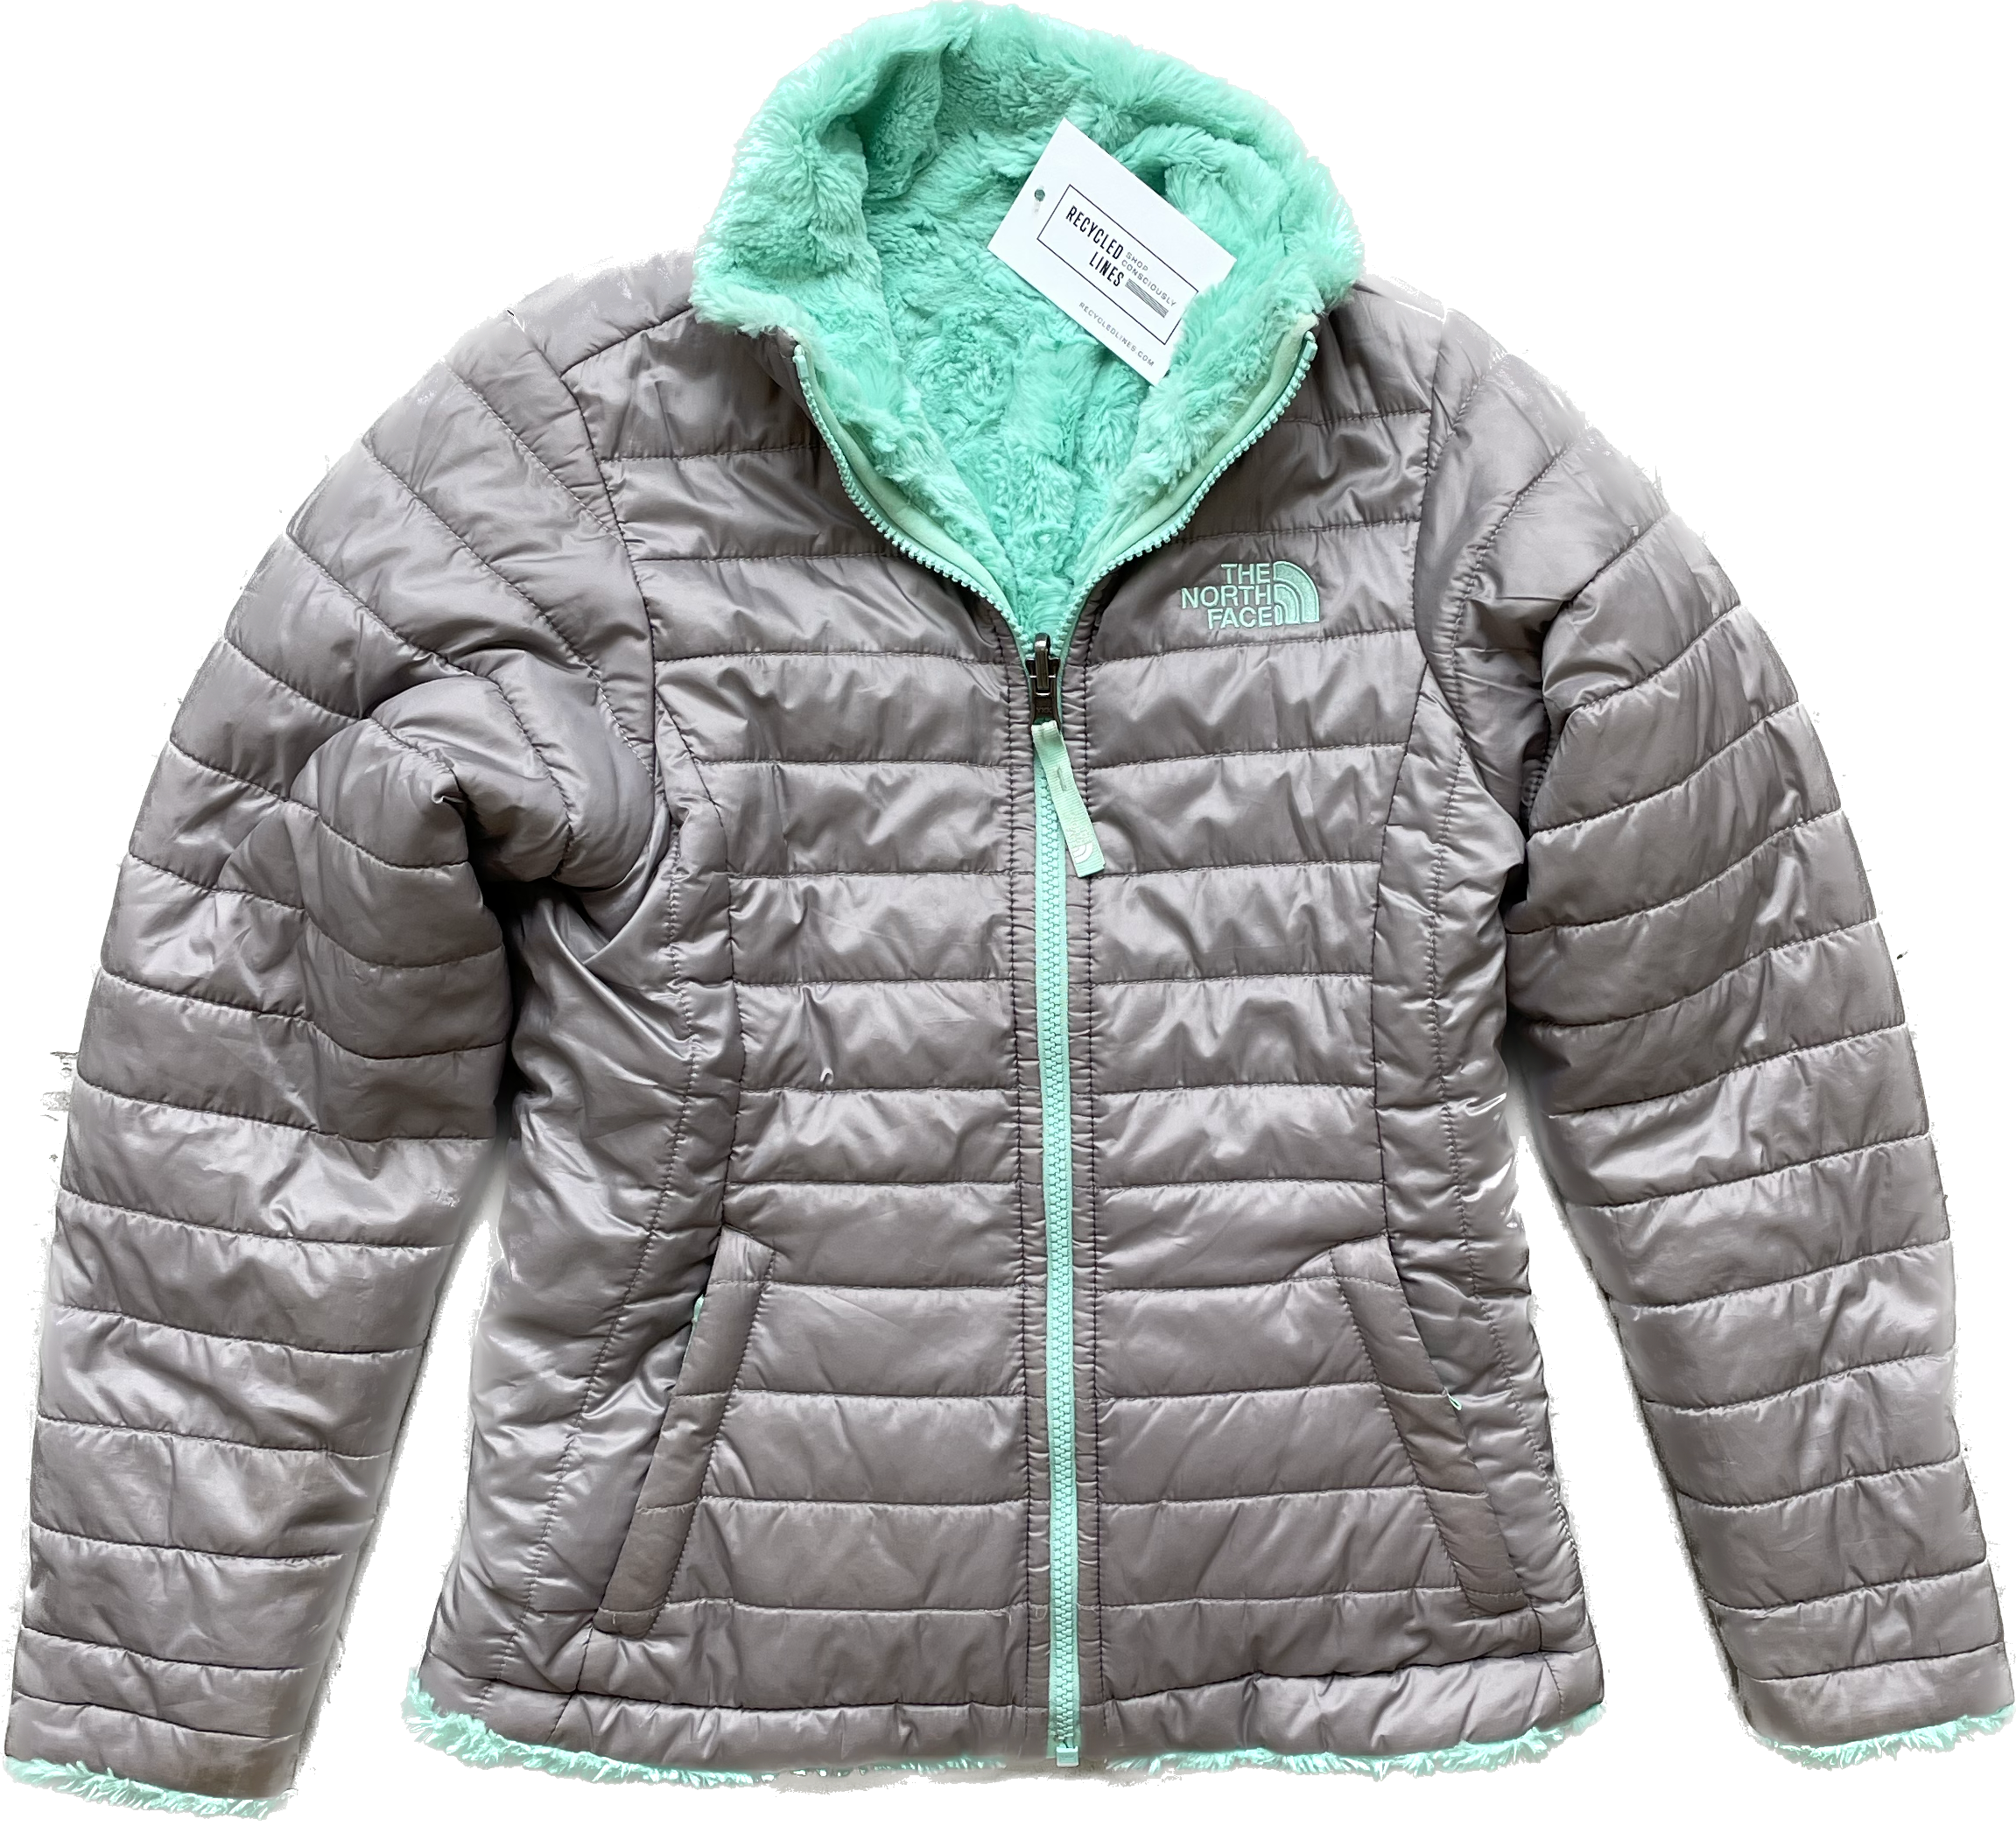 The North Face Reversible Jacket, Gray/Teal Girls Size M (10/12)